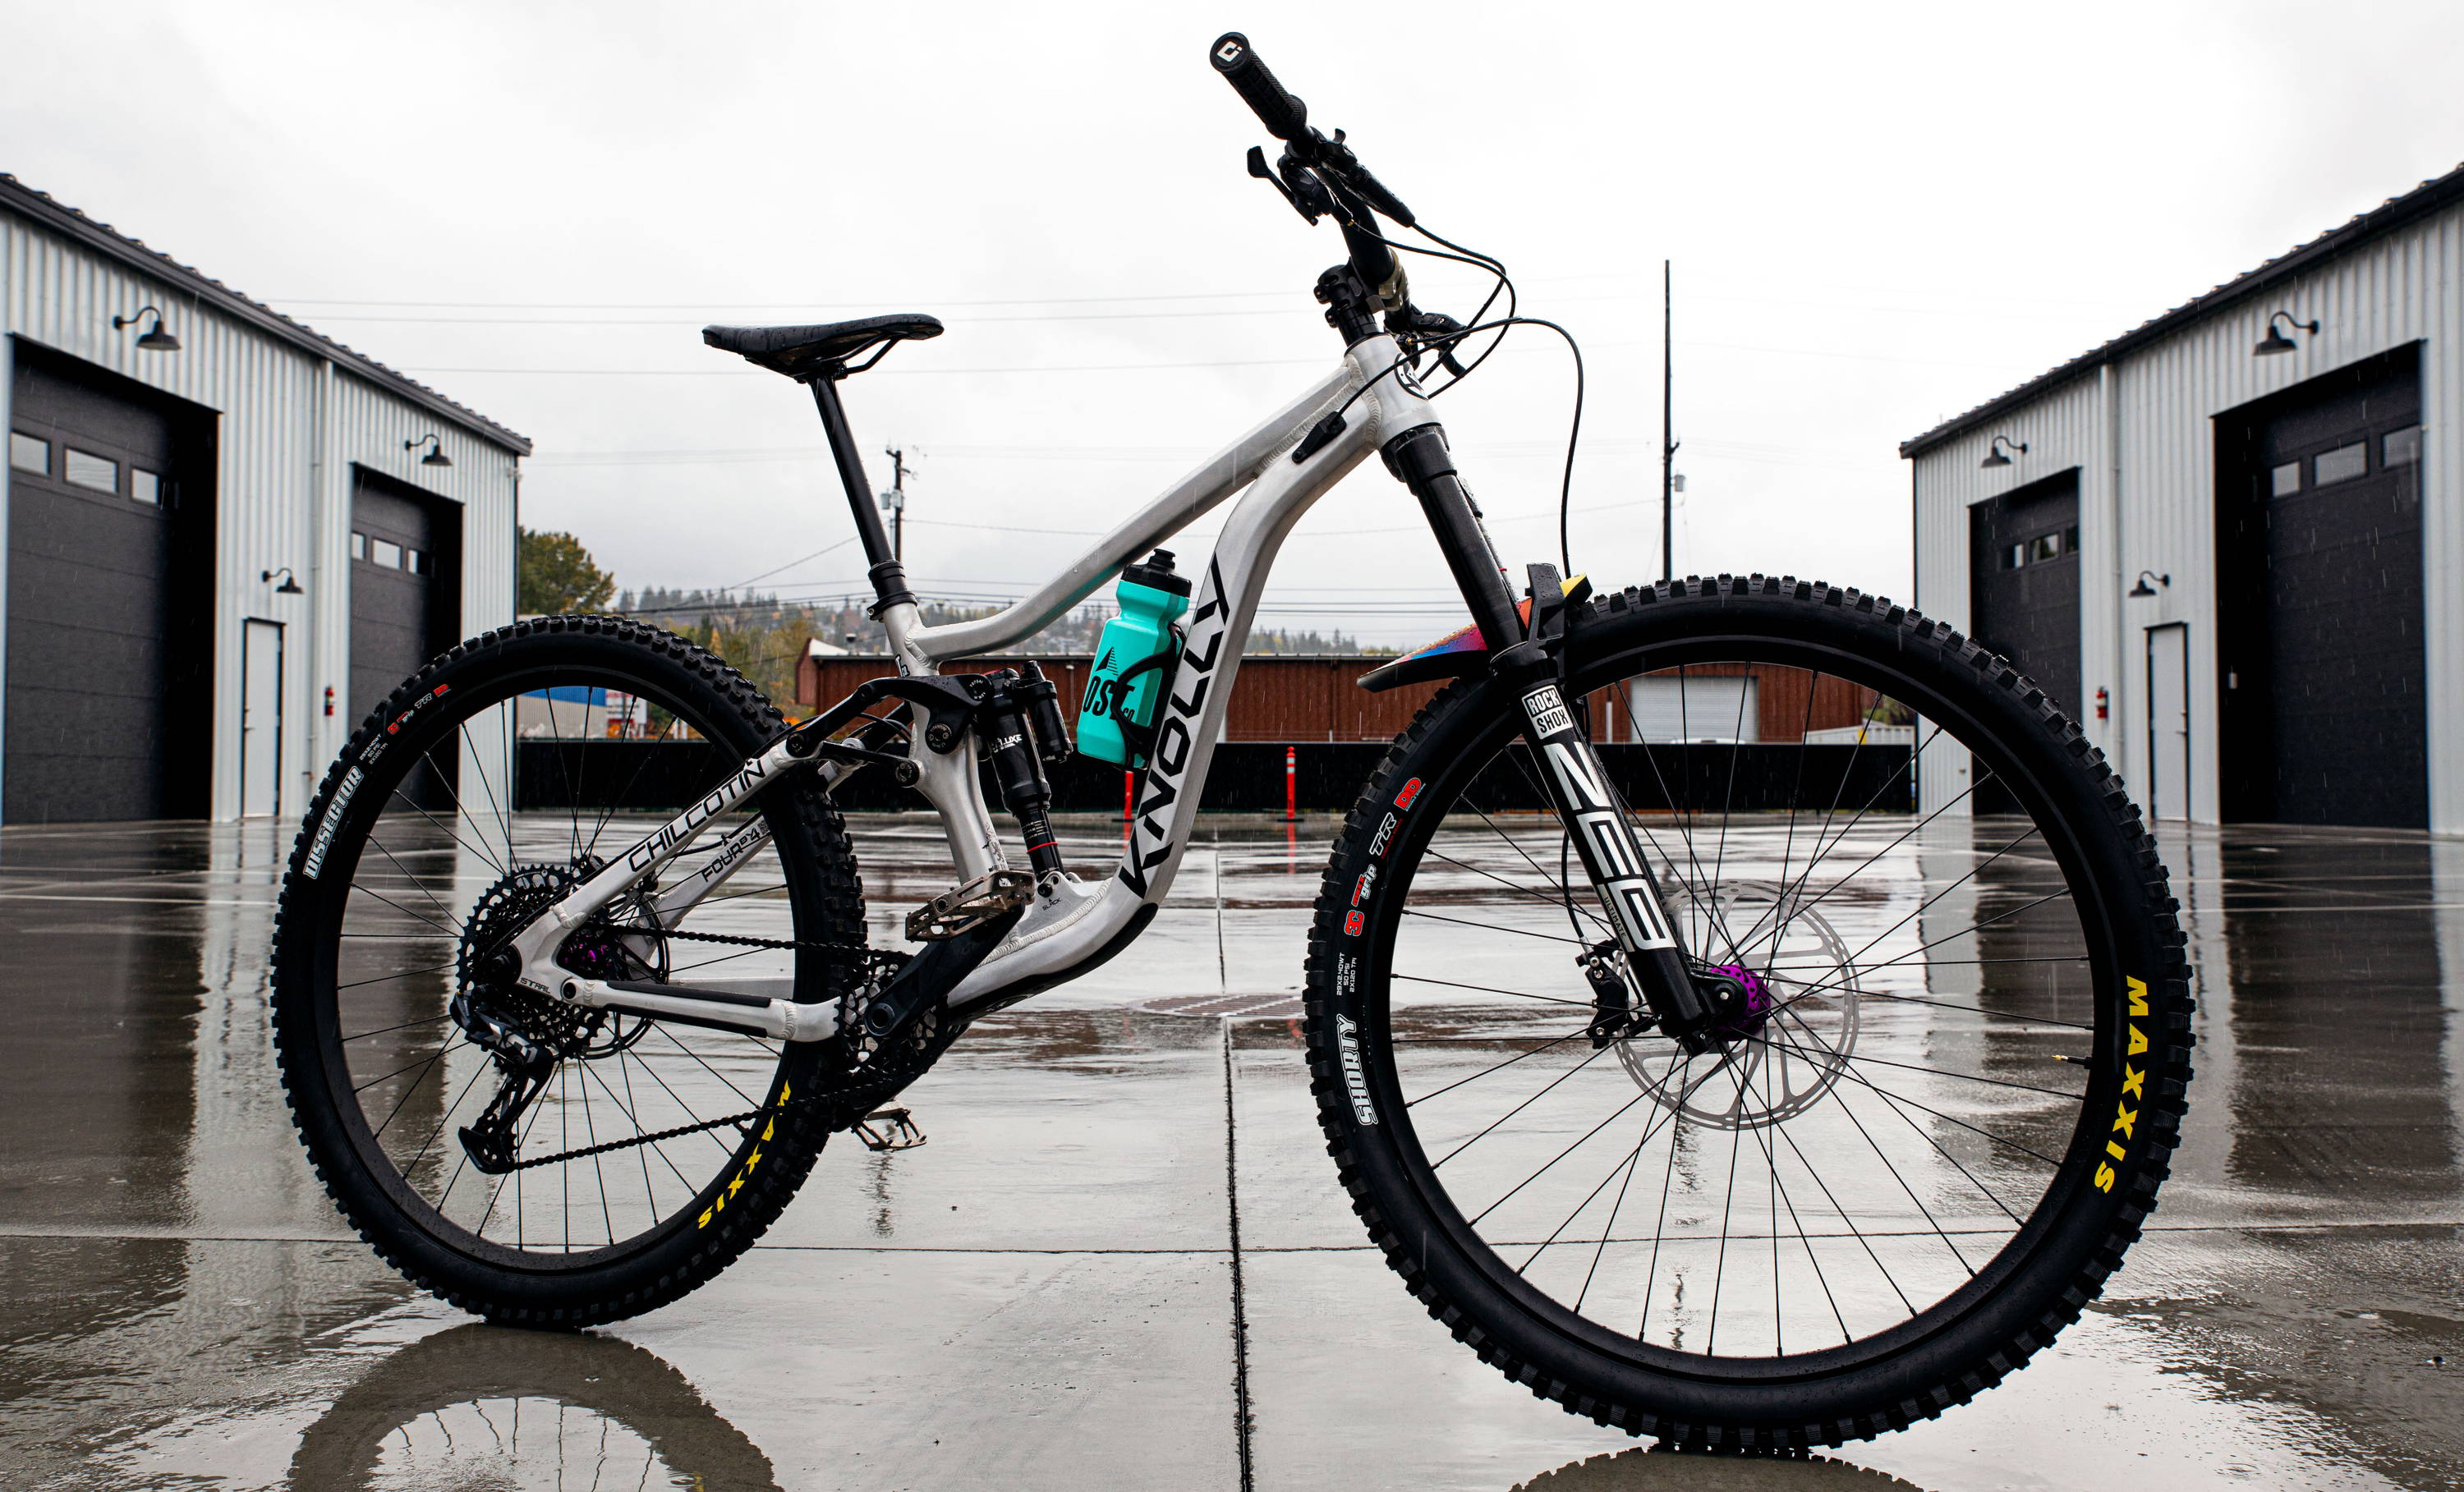 Knolly Chilcotin with RockShox ZEB Super Deluxe Ultimate Maxxis Tires SRAM Drivetrain on wet pavement in industrial space